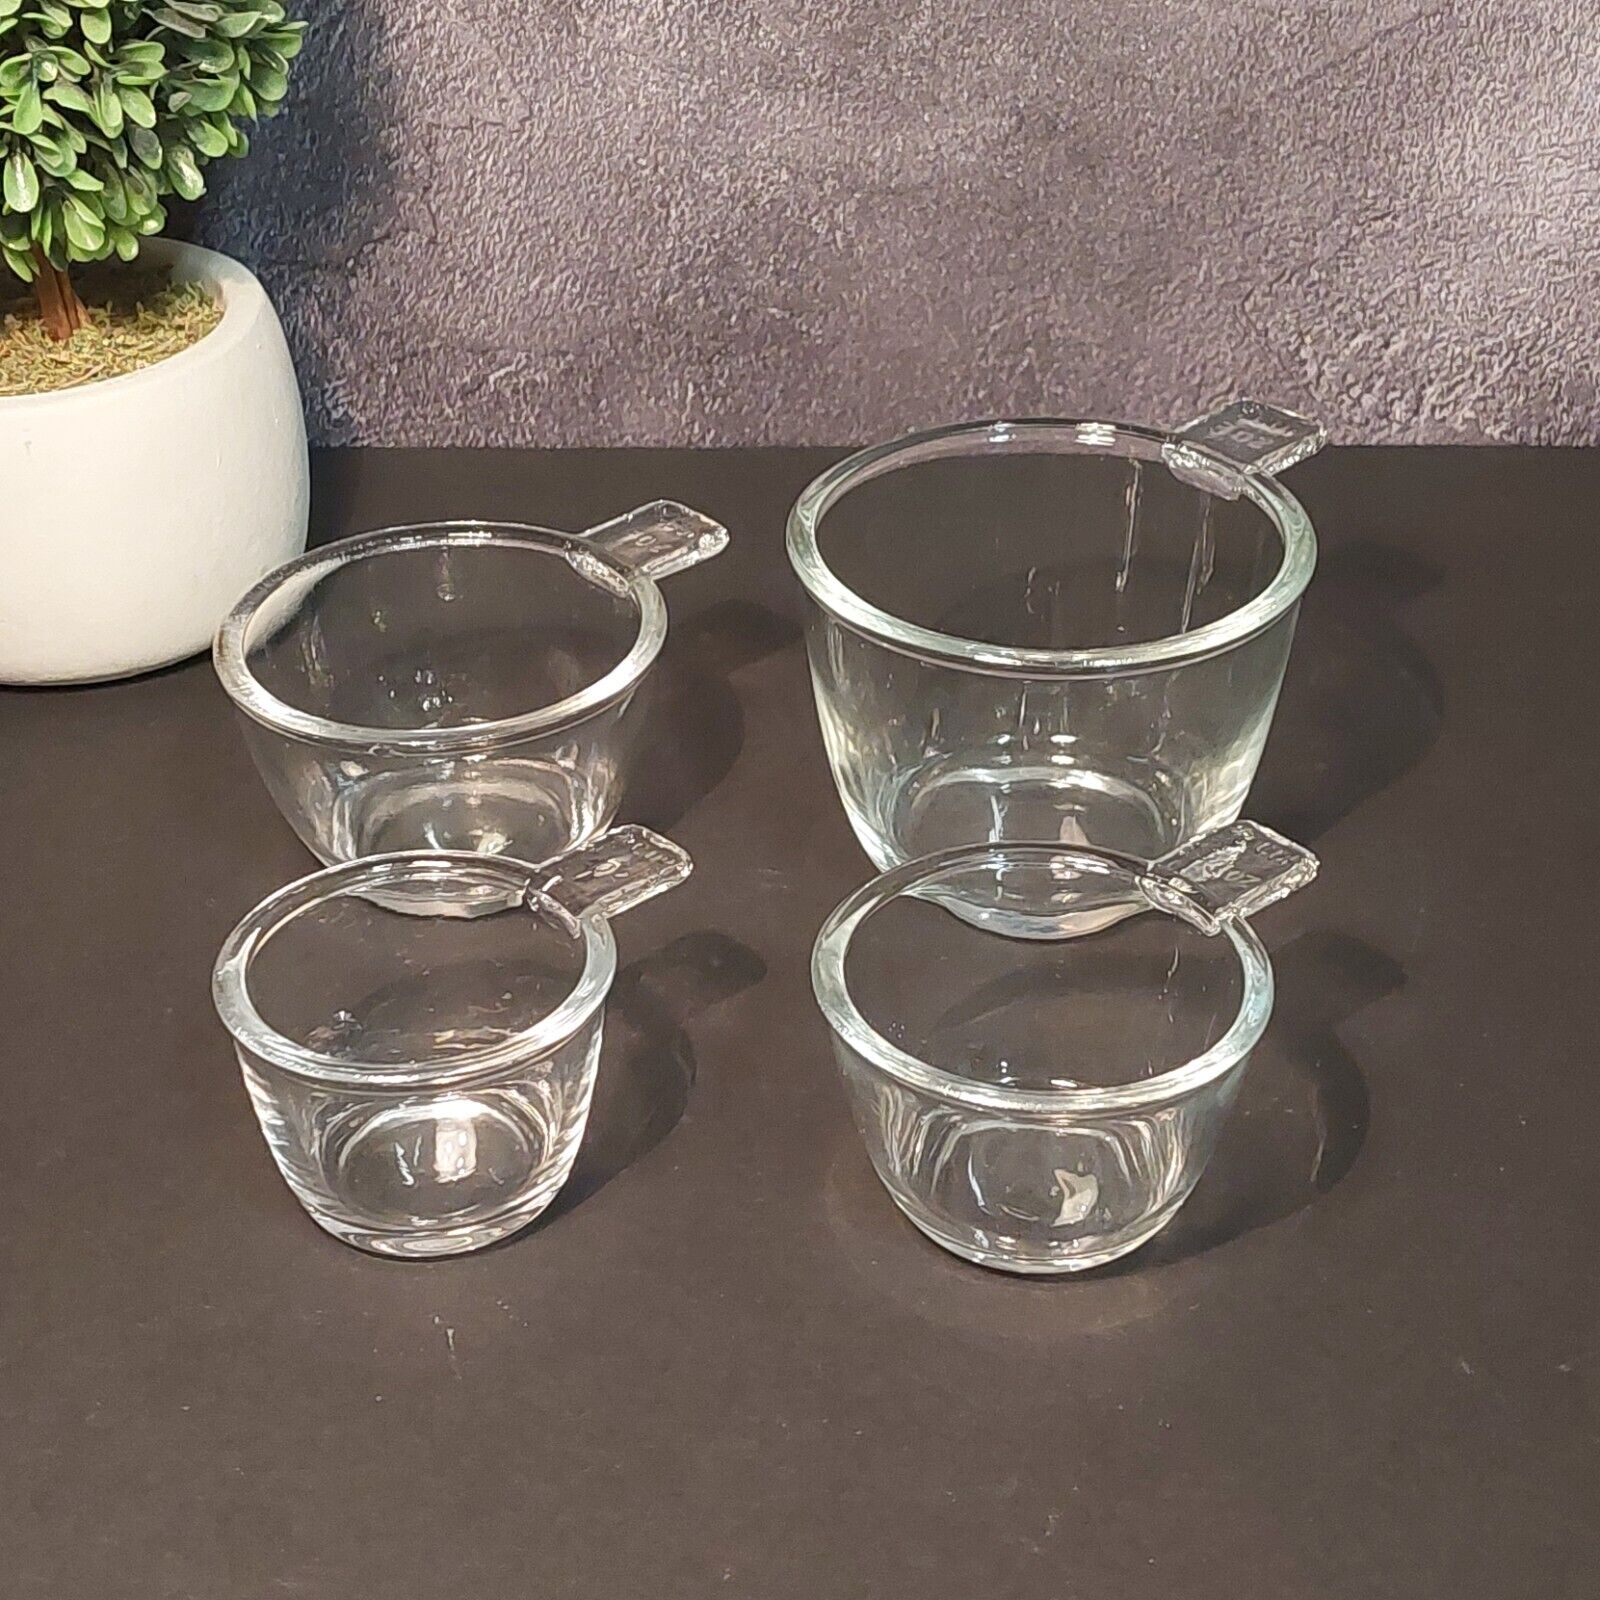 CLEAR DEPRESSION STYLE GLASS 4 PC NESTING MEASURING CUPS, Vintage, Bowl, Dish